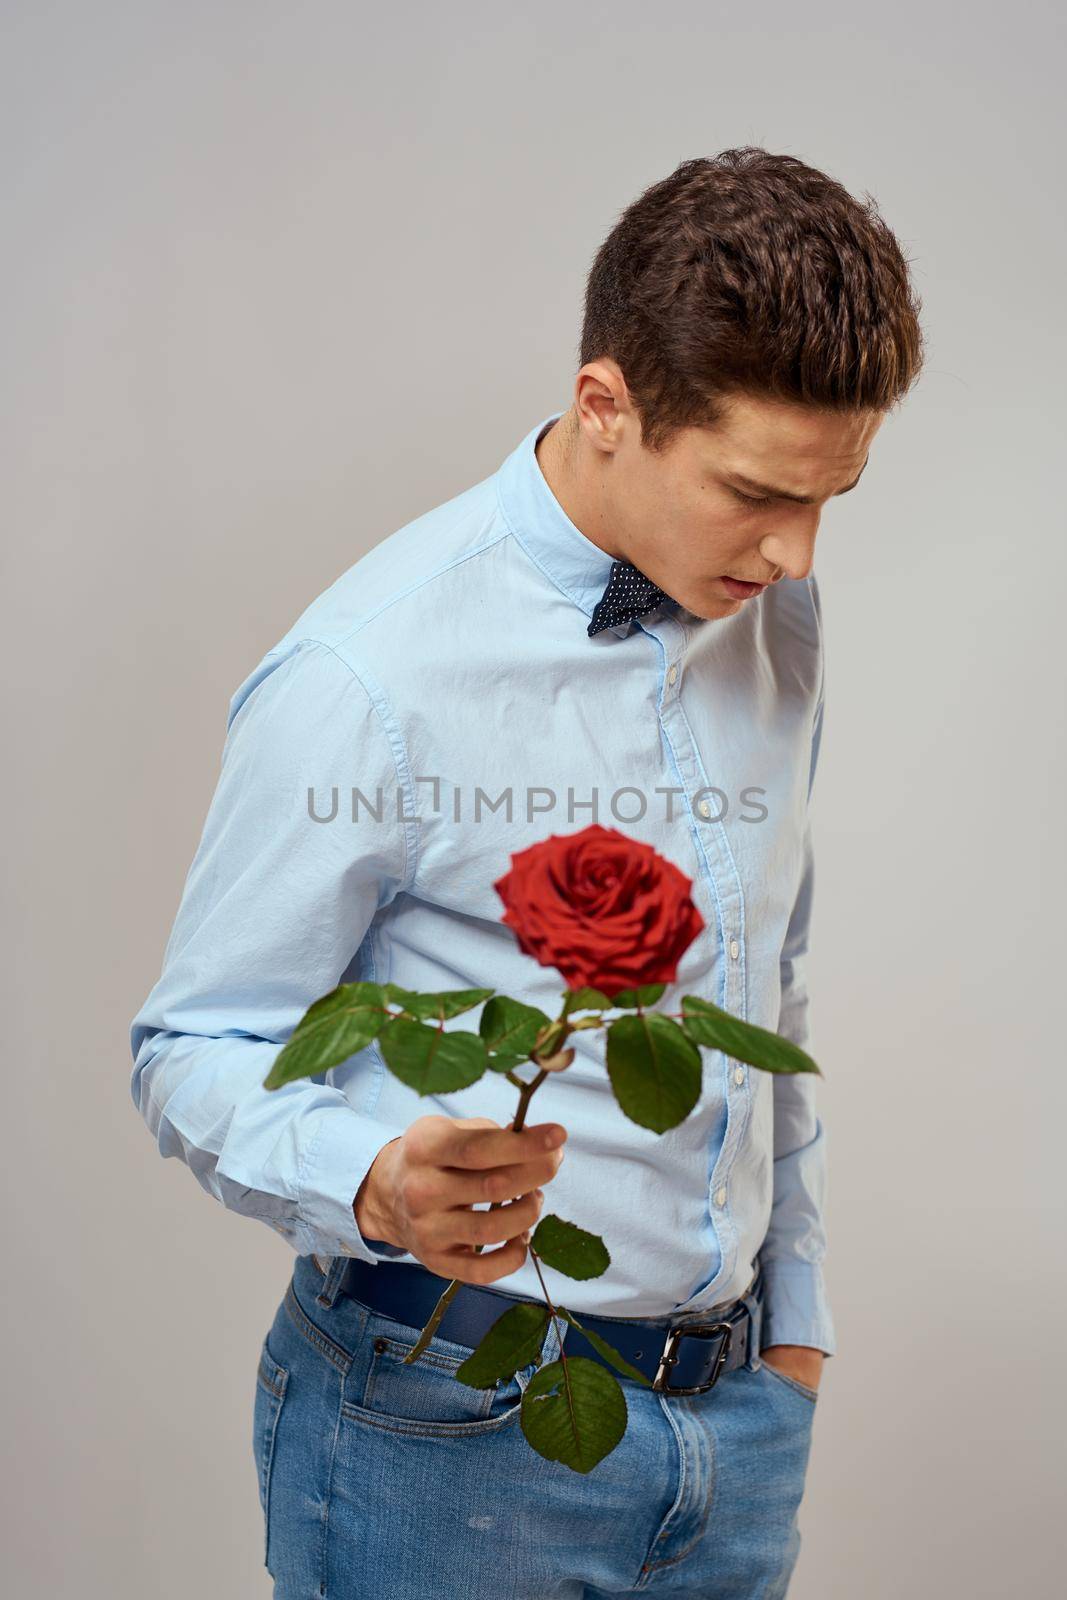 man holding a rose dating waiting dating lifestyle. High quality photo